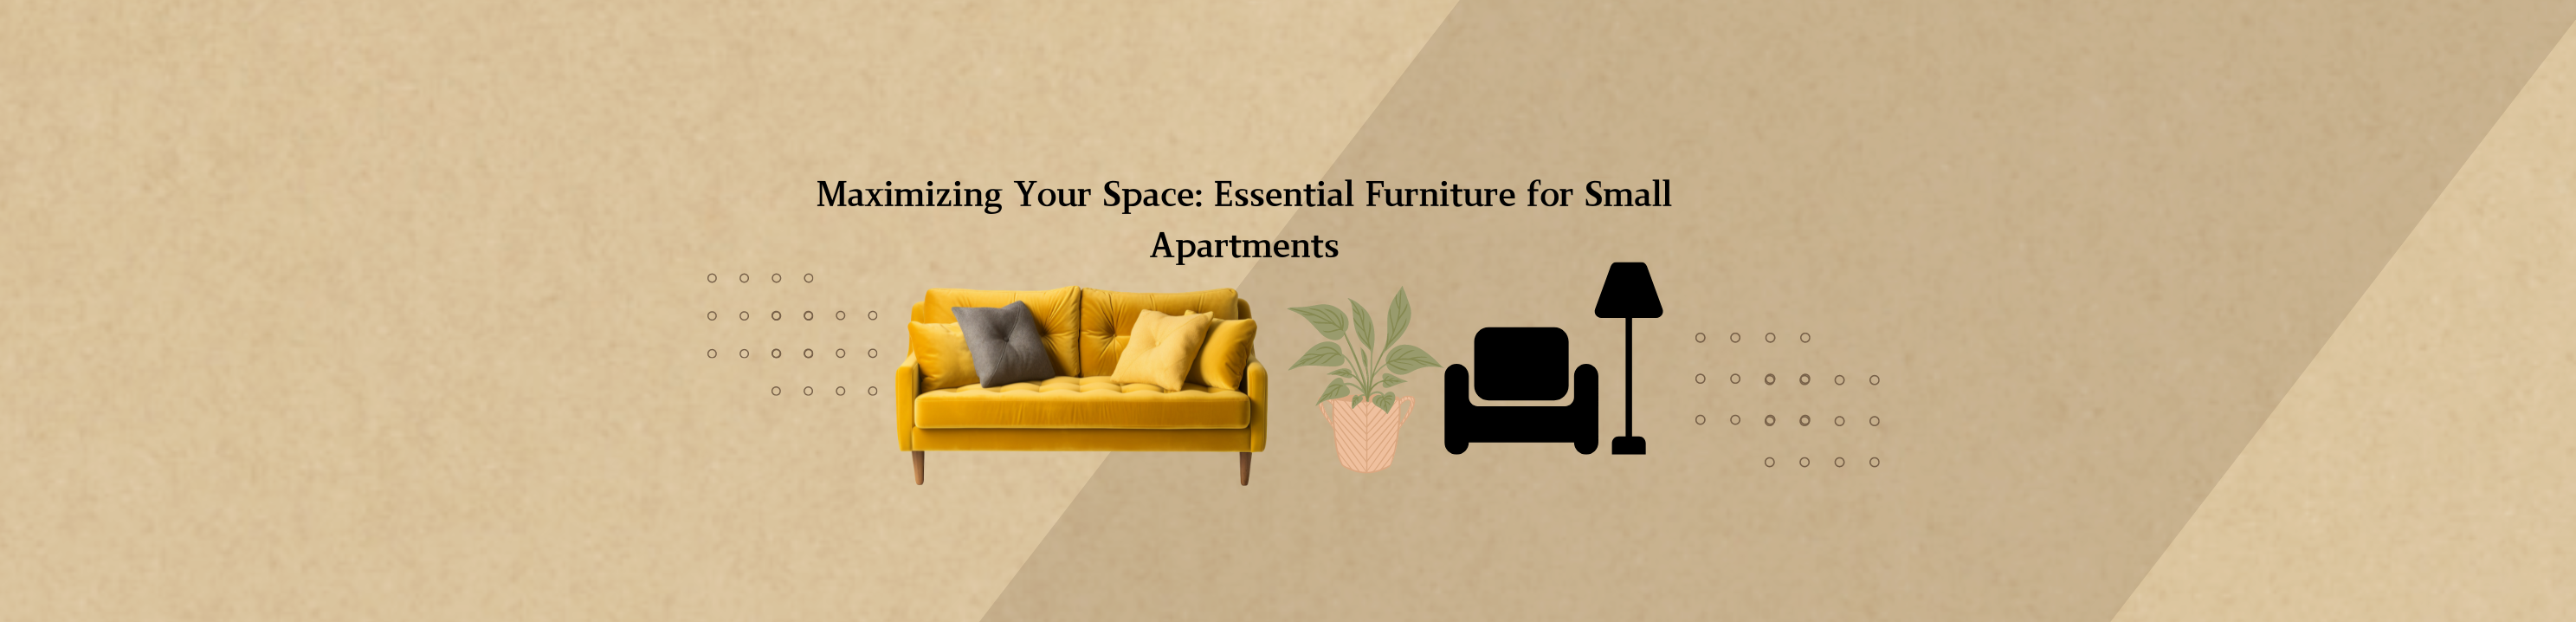 Maximizing Your Space: Essential Furniture for Small Apartments